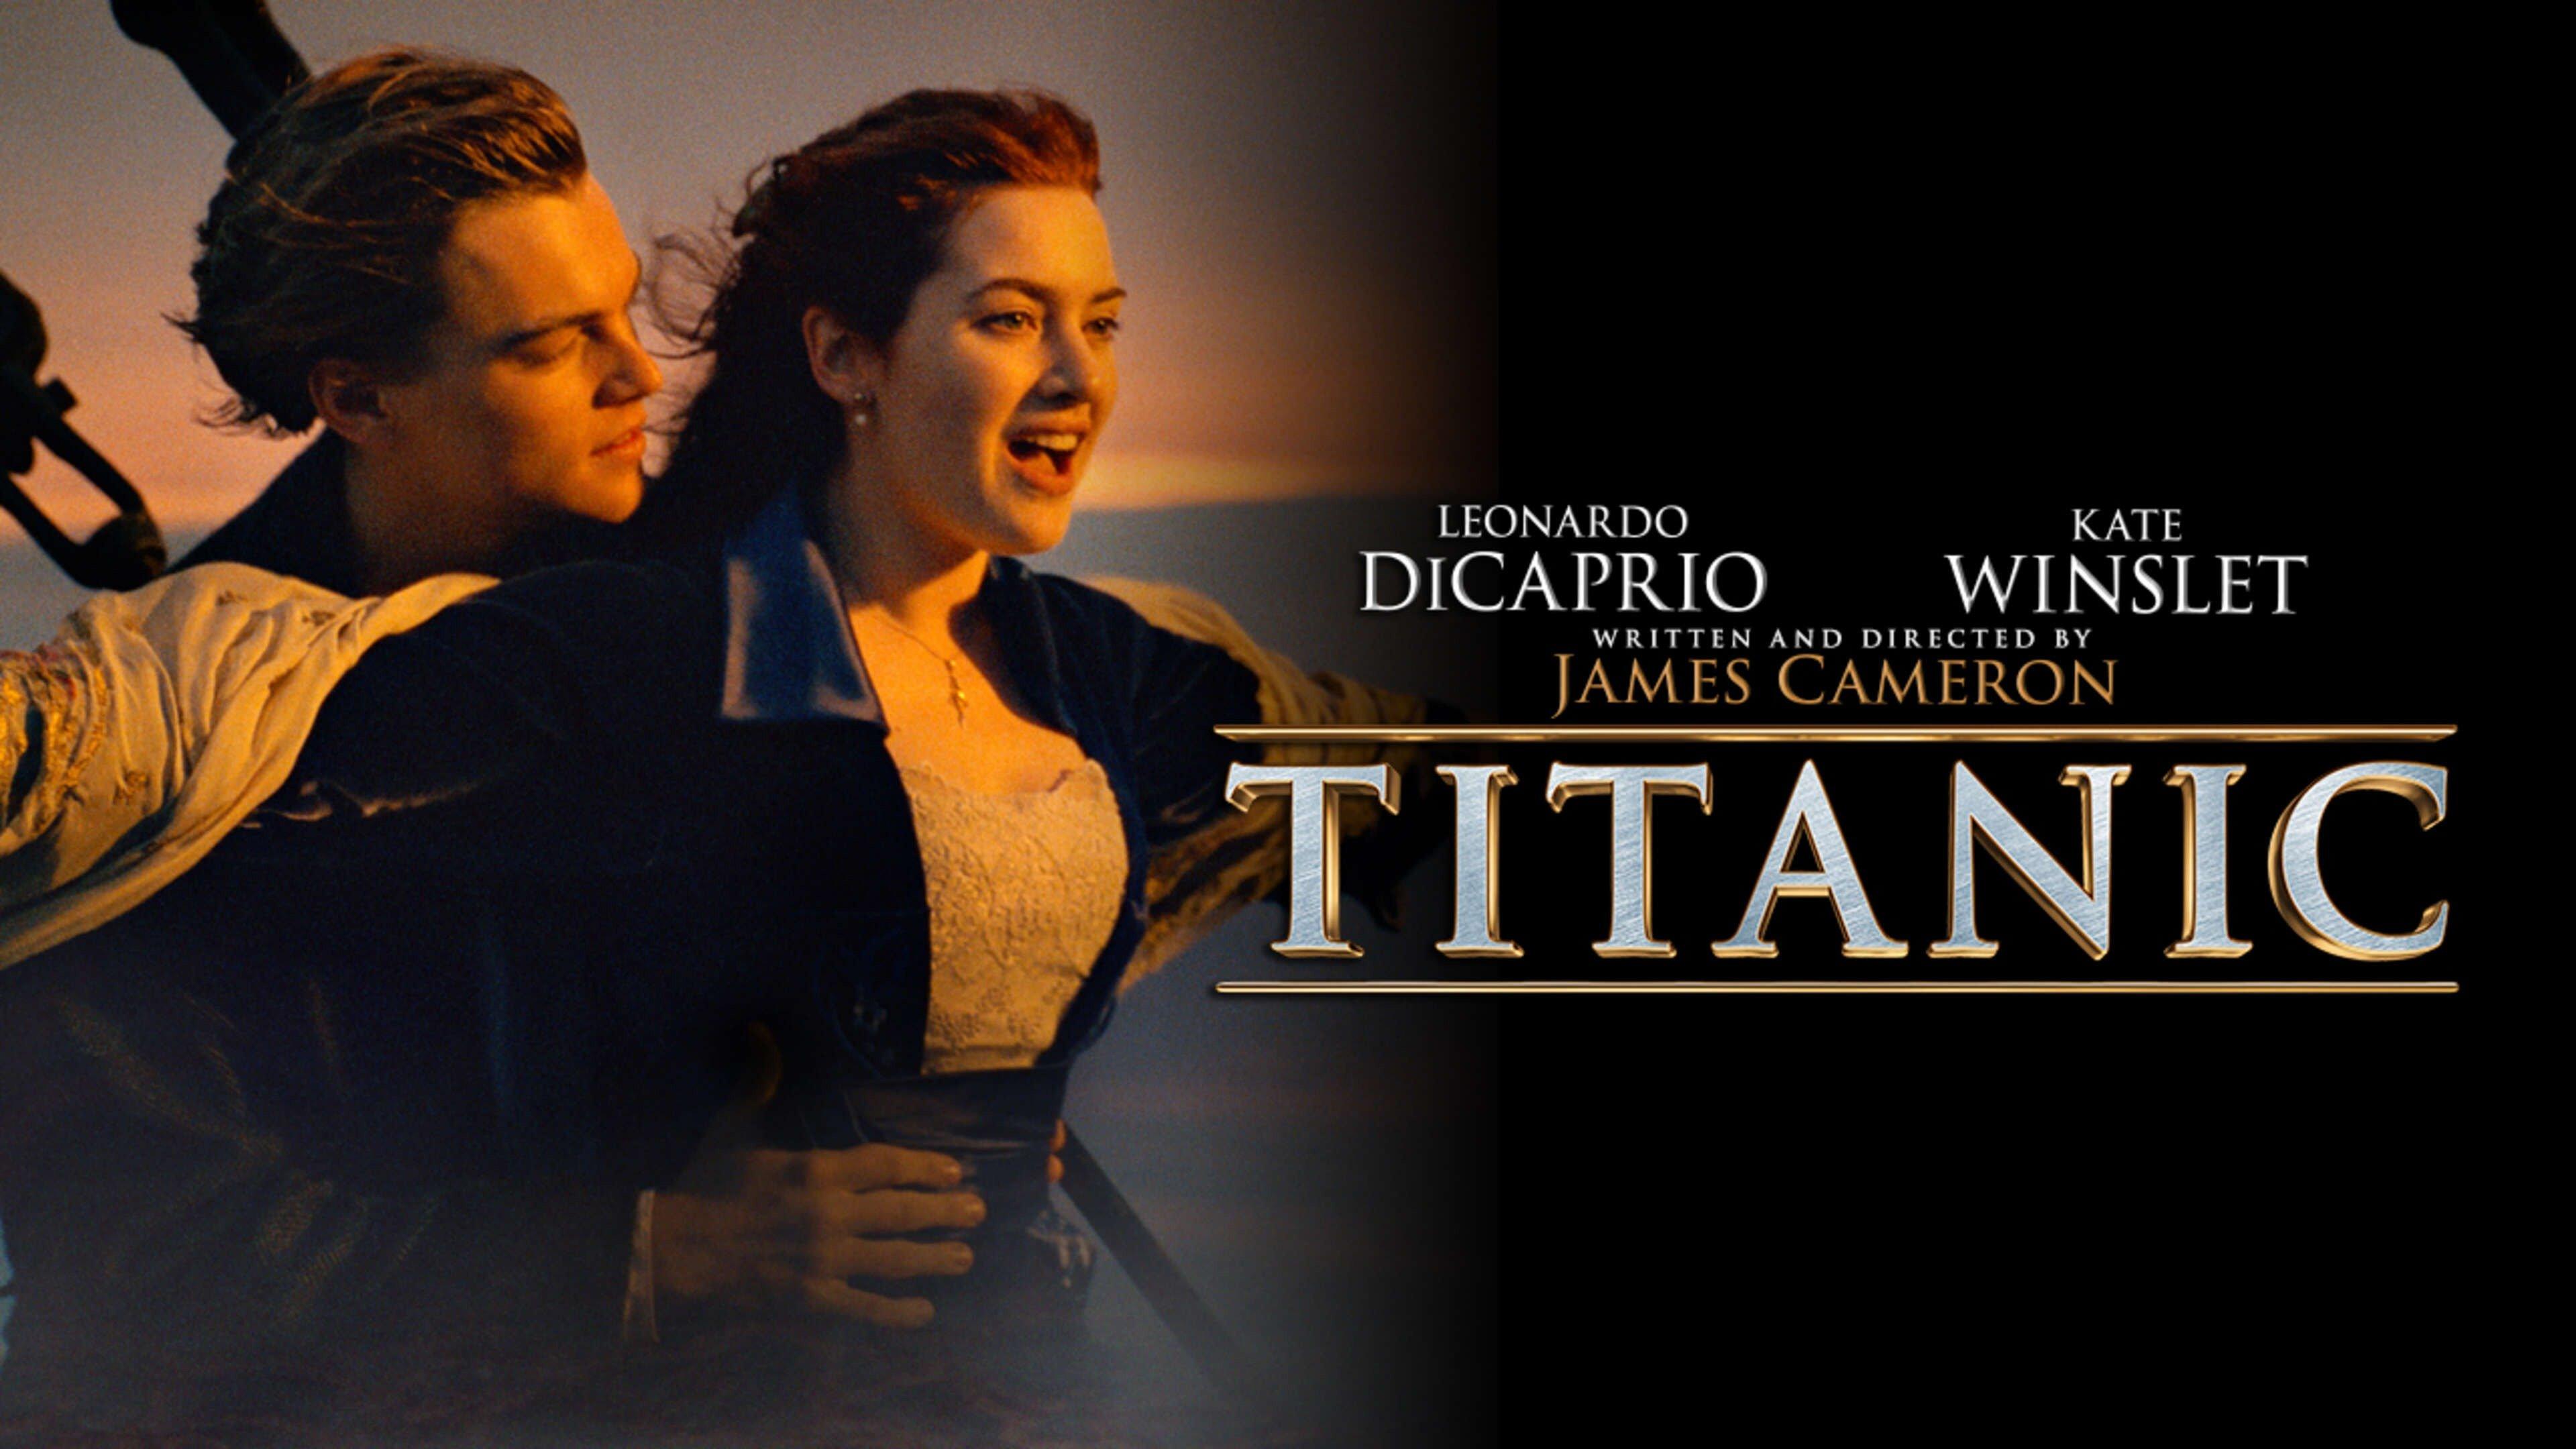 Watch Titanic Streaming Online on Philo (Free Trial)